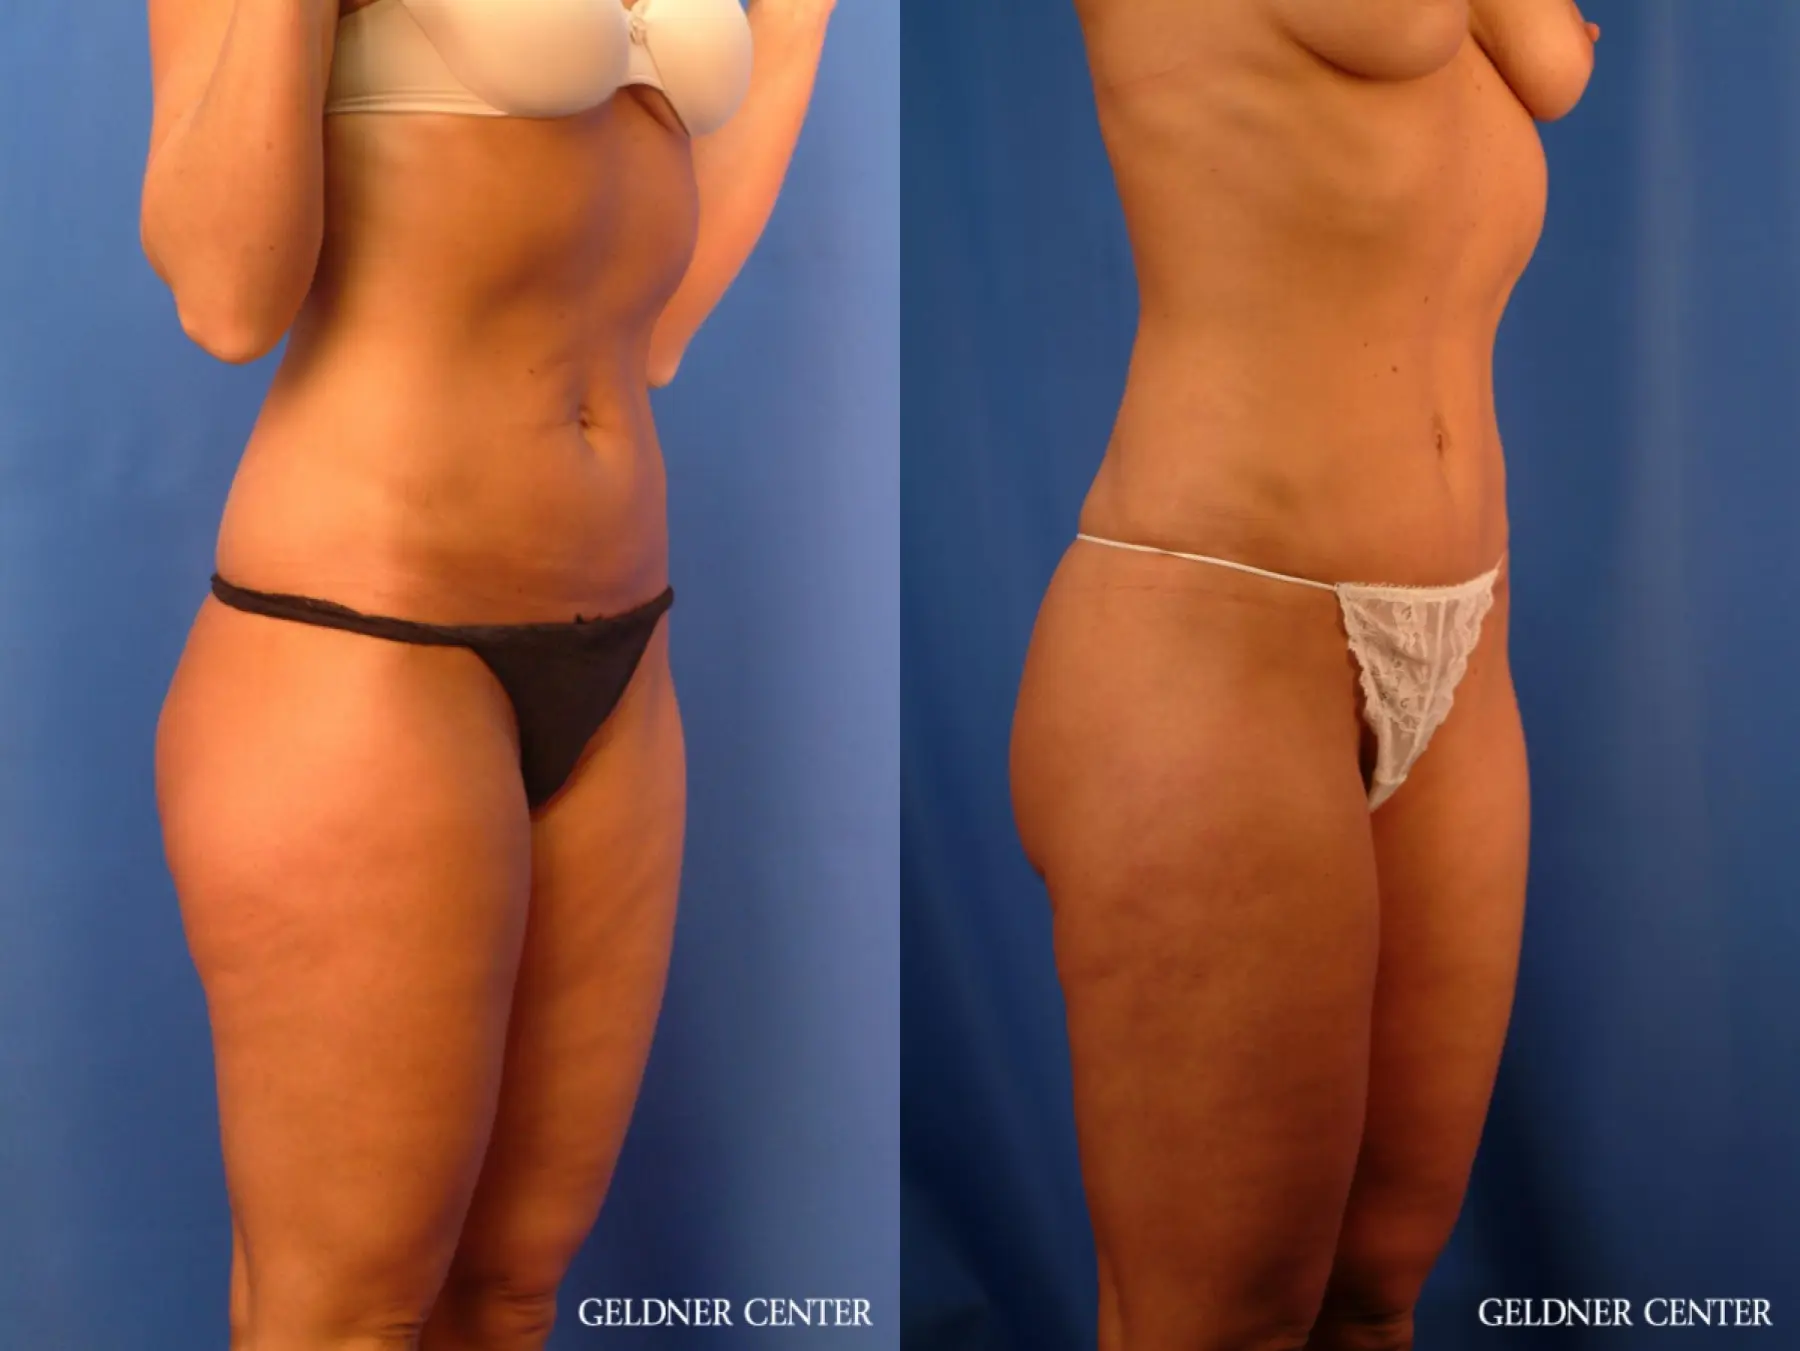 Liposuction: Patient 20 - Before and After 2